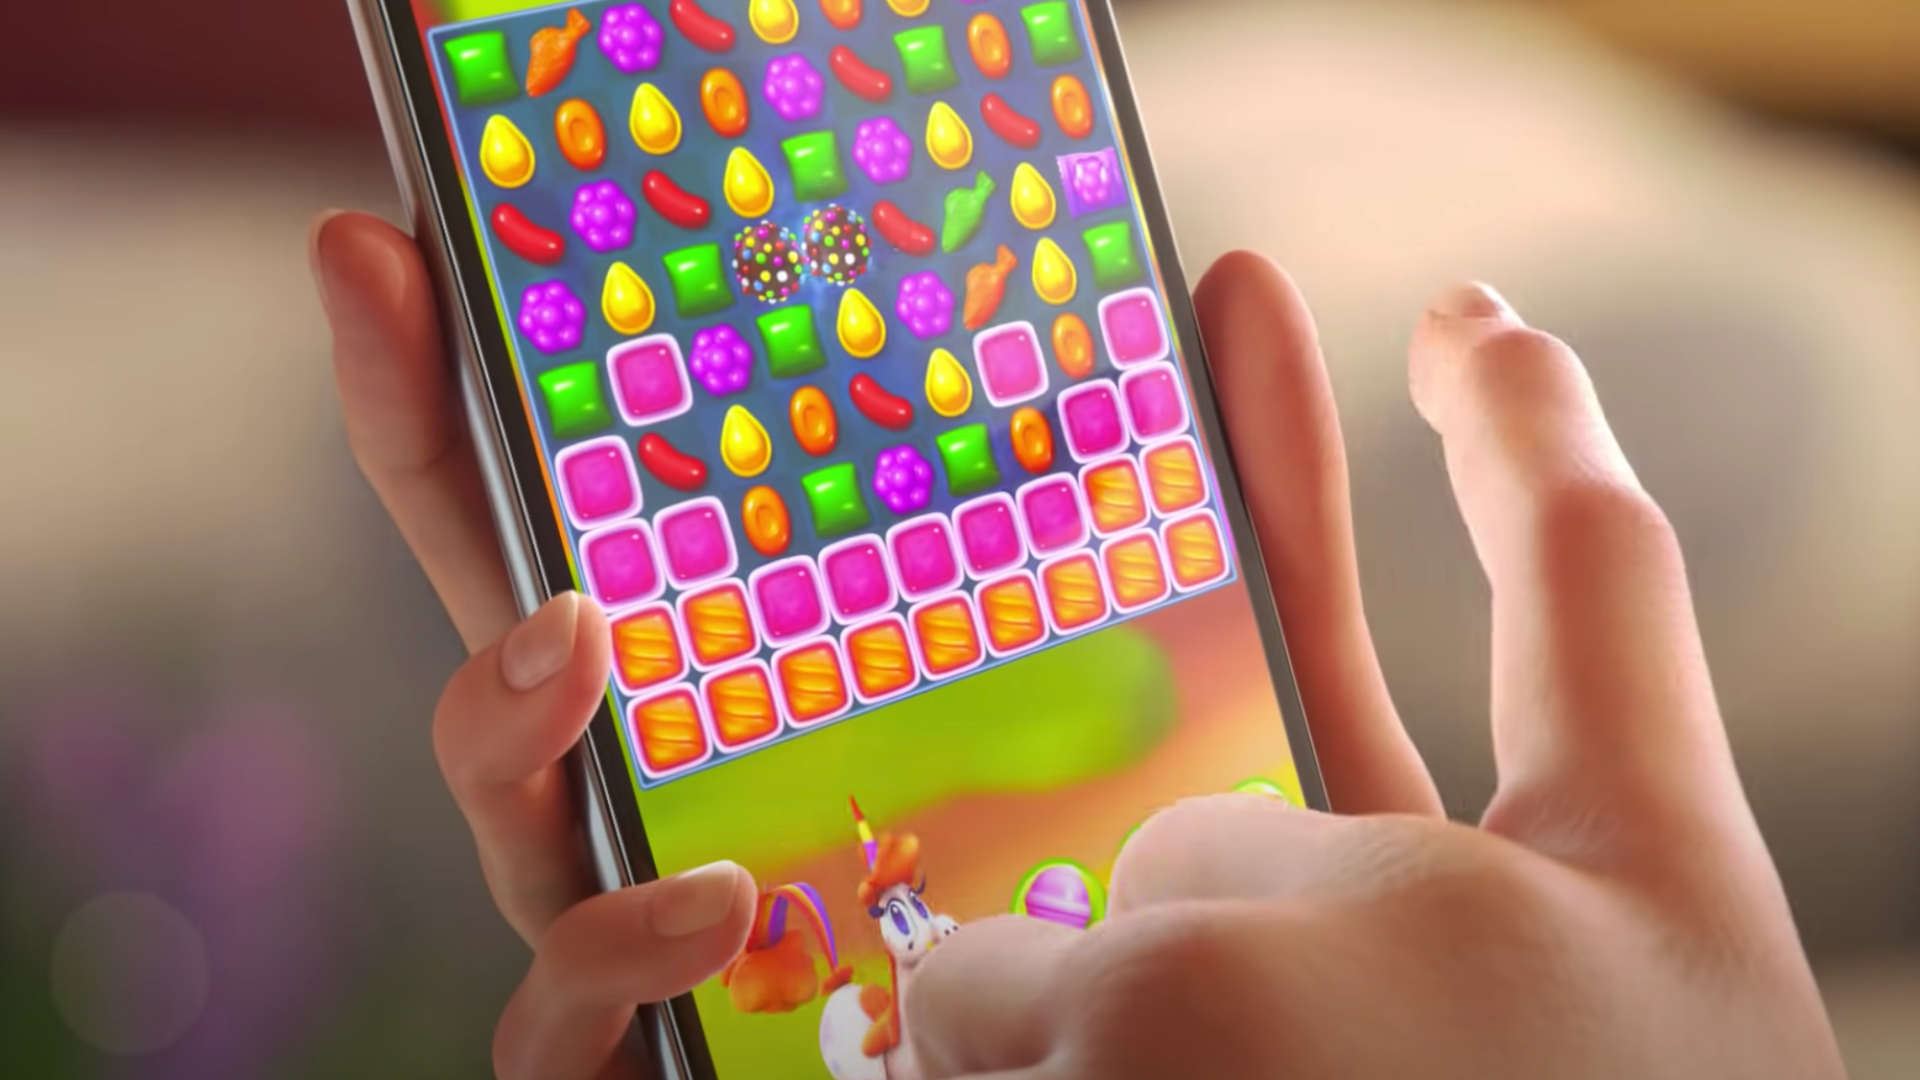 The new iOS 11 @AppStore is here! Head - Candy Crush Saga